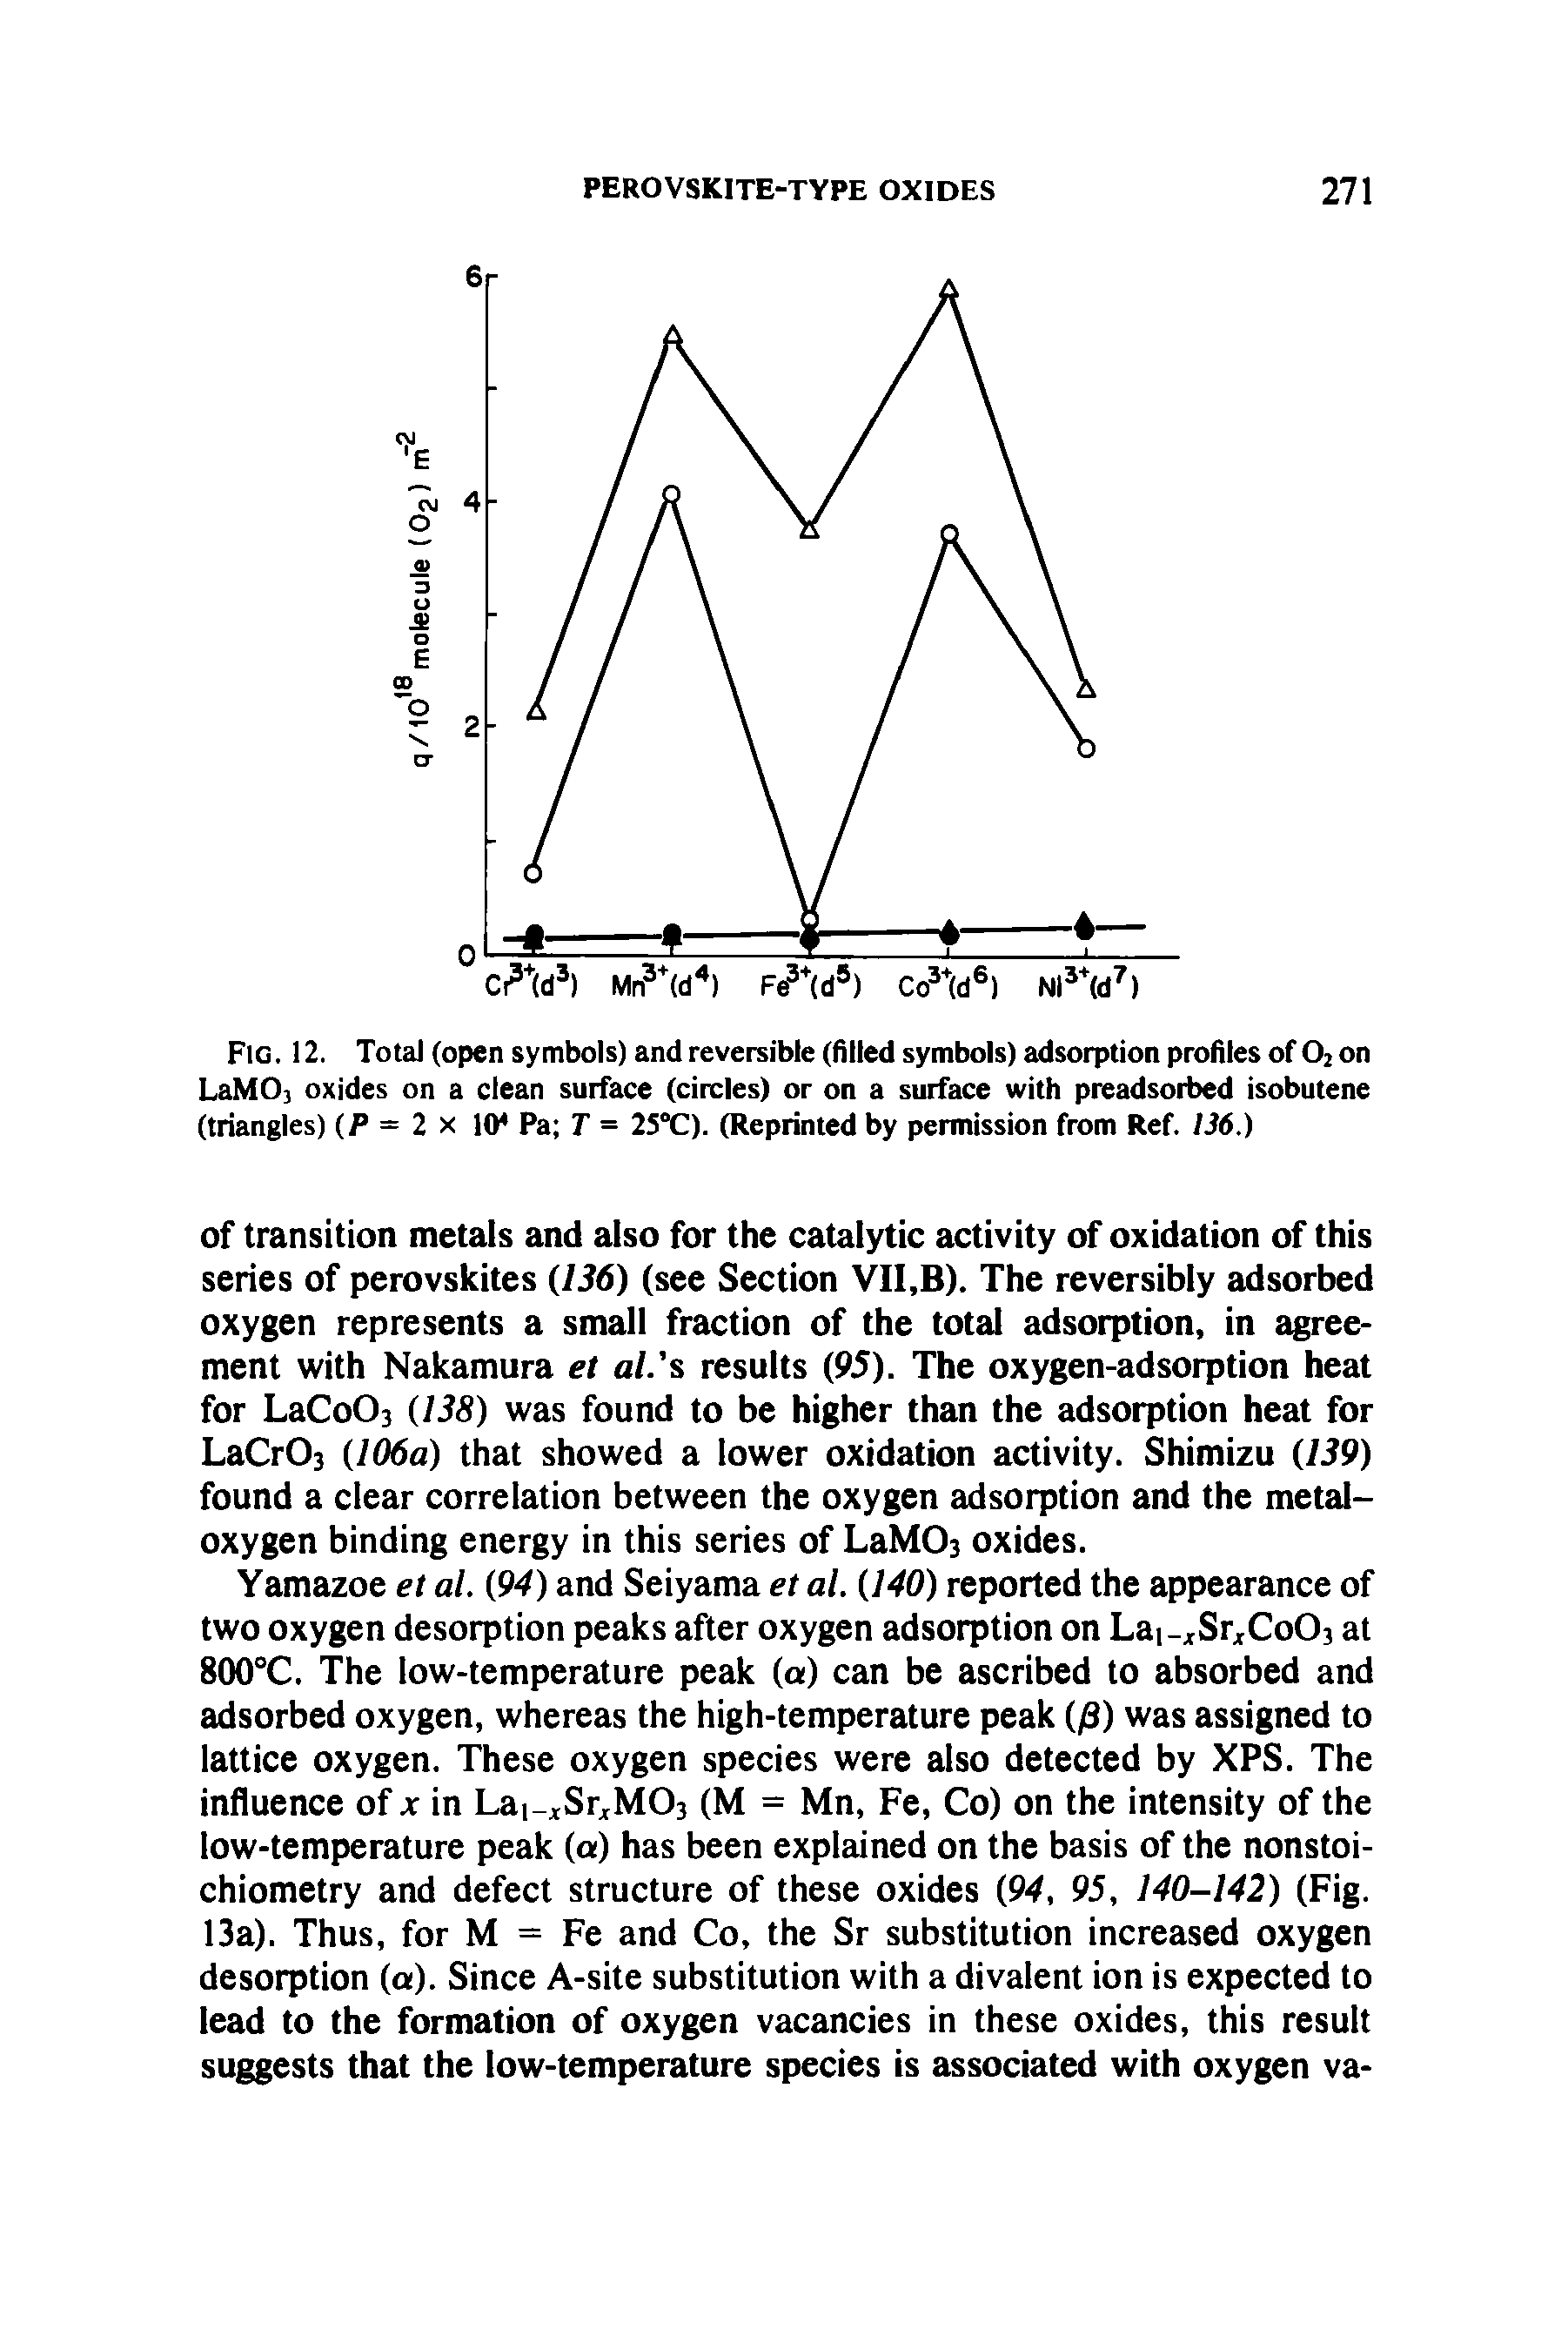 Fig. 12. Total (open symbols) and reversible (filled symbols) adsorption profiles of 02 on LaM03 oxides on a clean surface (circles) or on a surface with preadsorbed isobutene (triangles) (P = 2 x 104 Pa T = 25°C). (Reprinted by permission from Ref. 136.)...